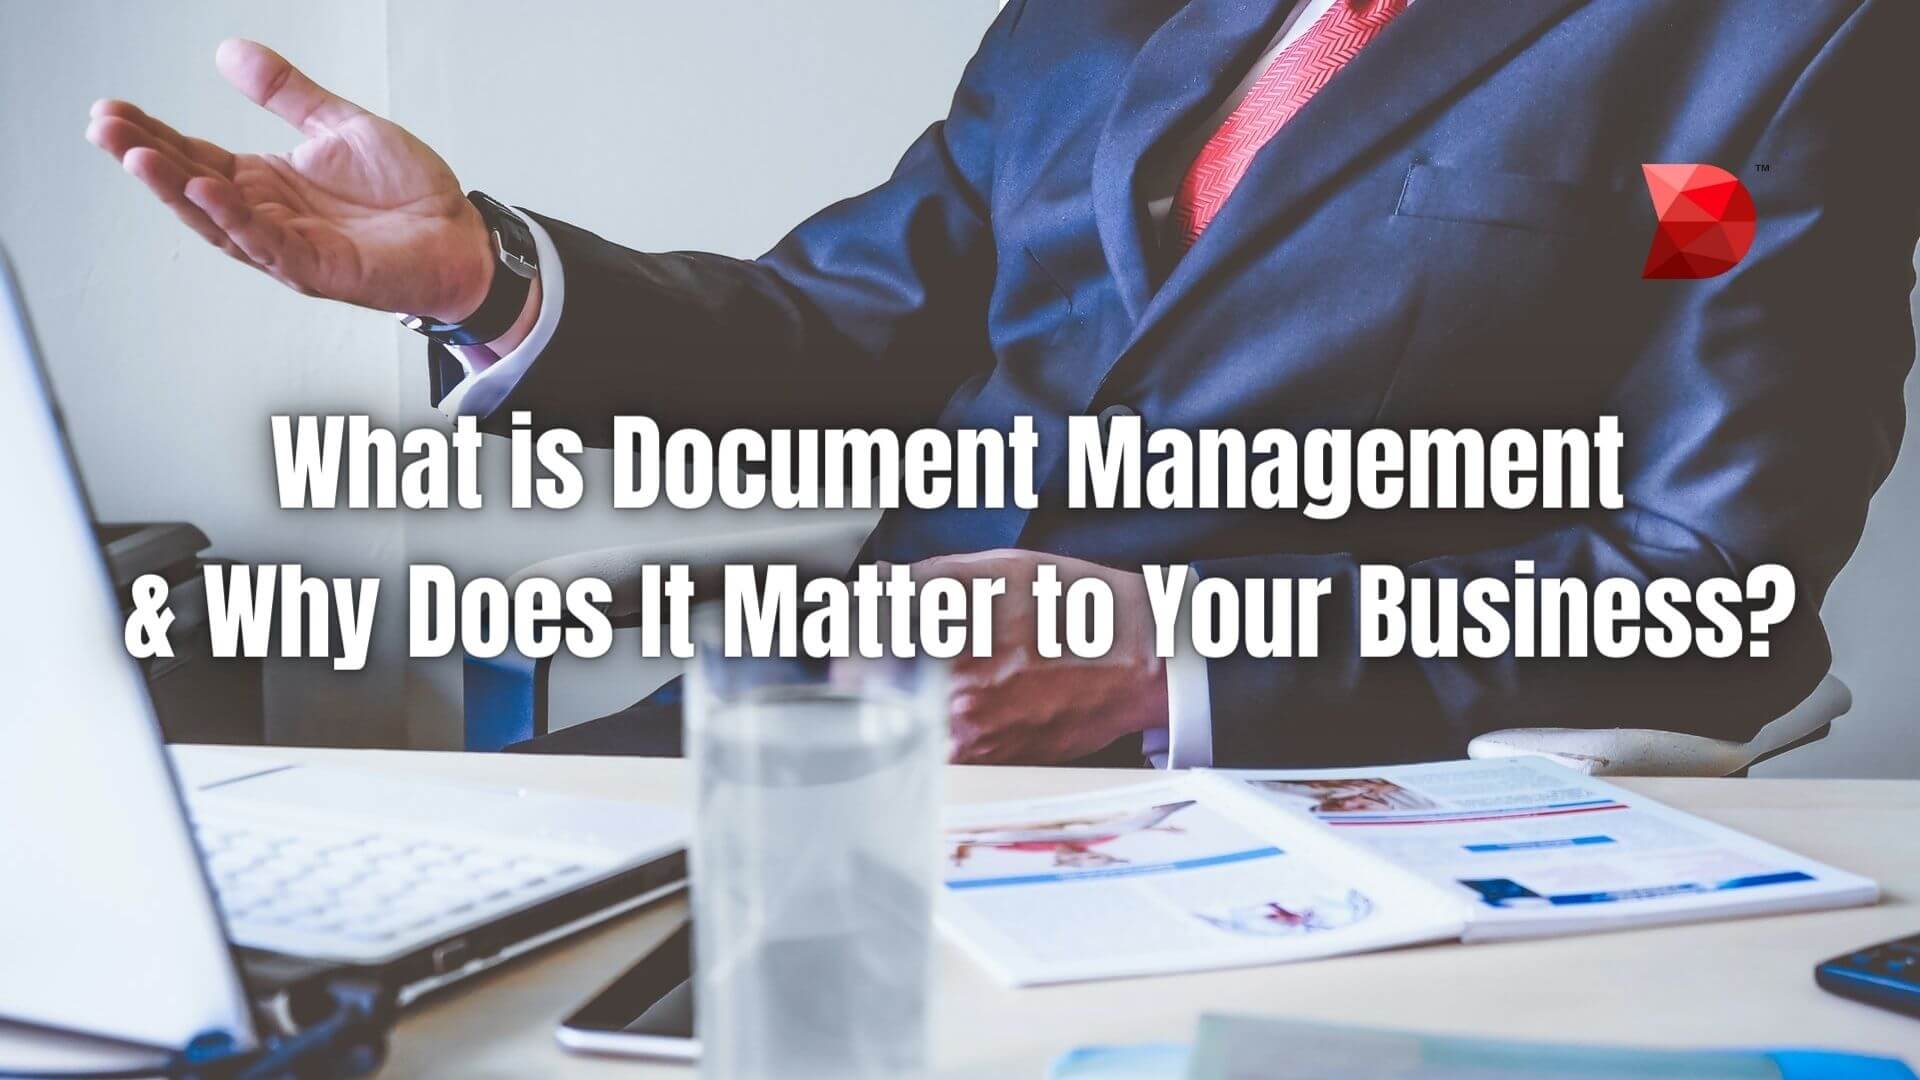 What is Document Management & Why Does It Matter to Your Business